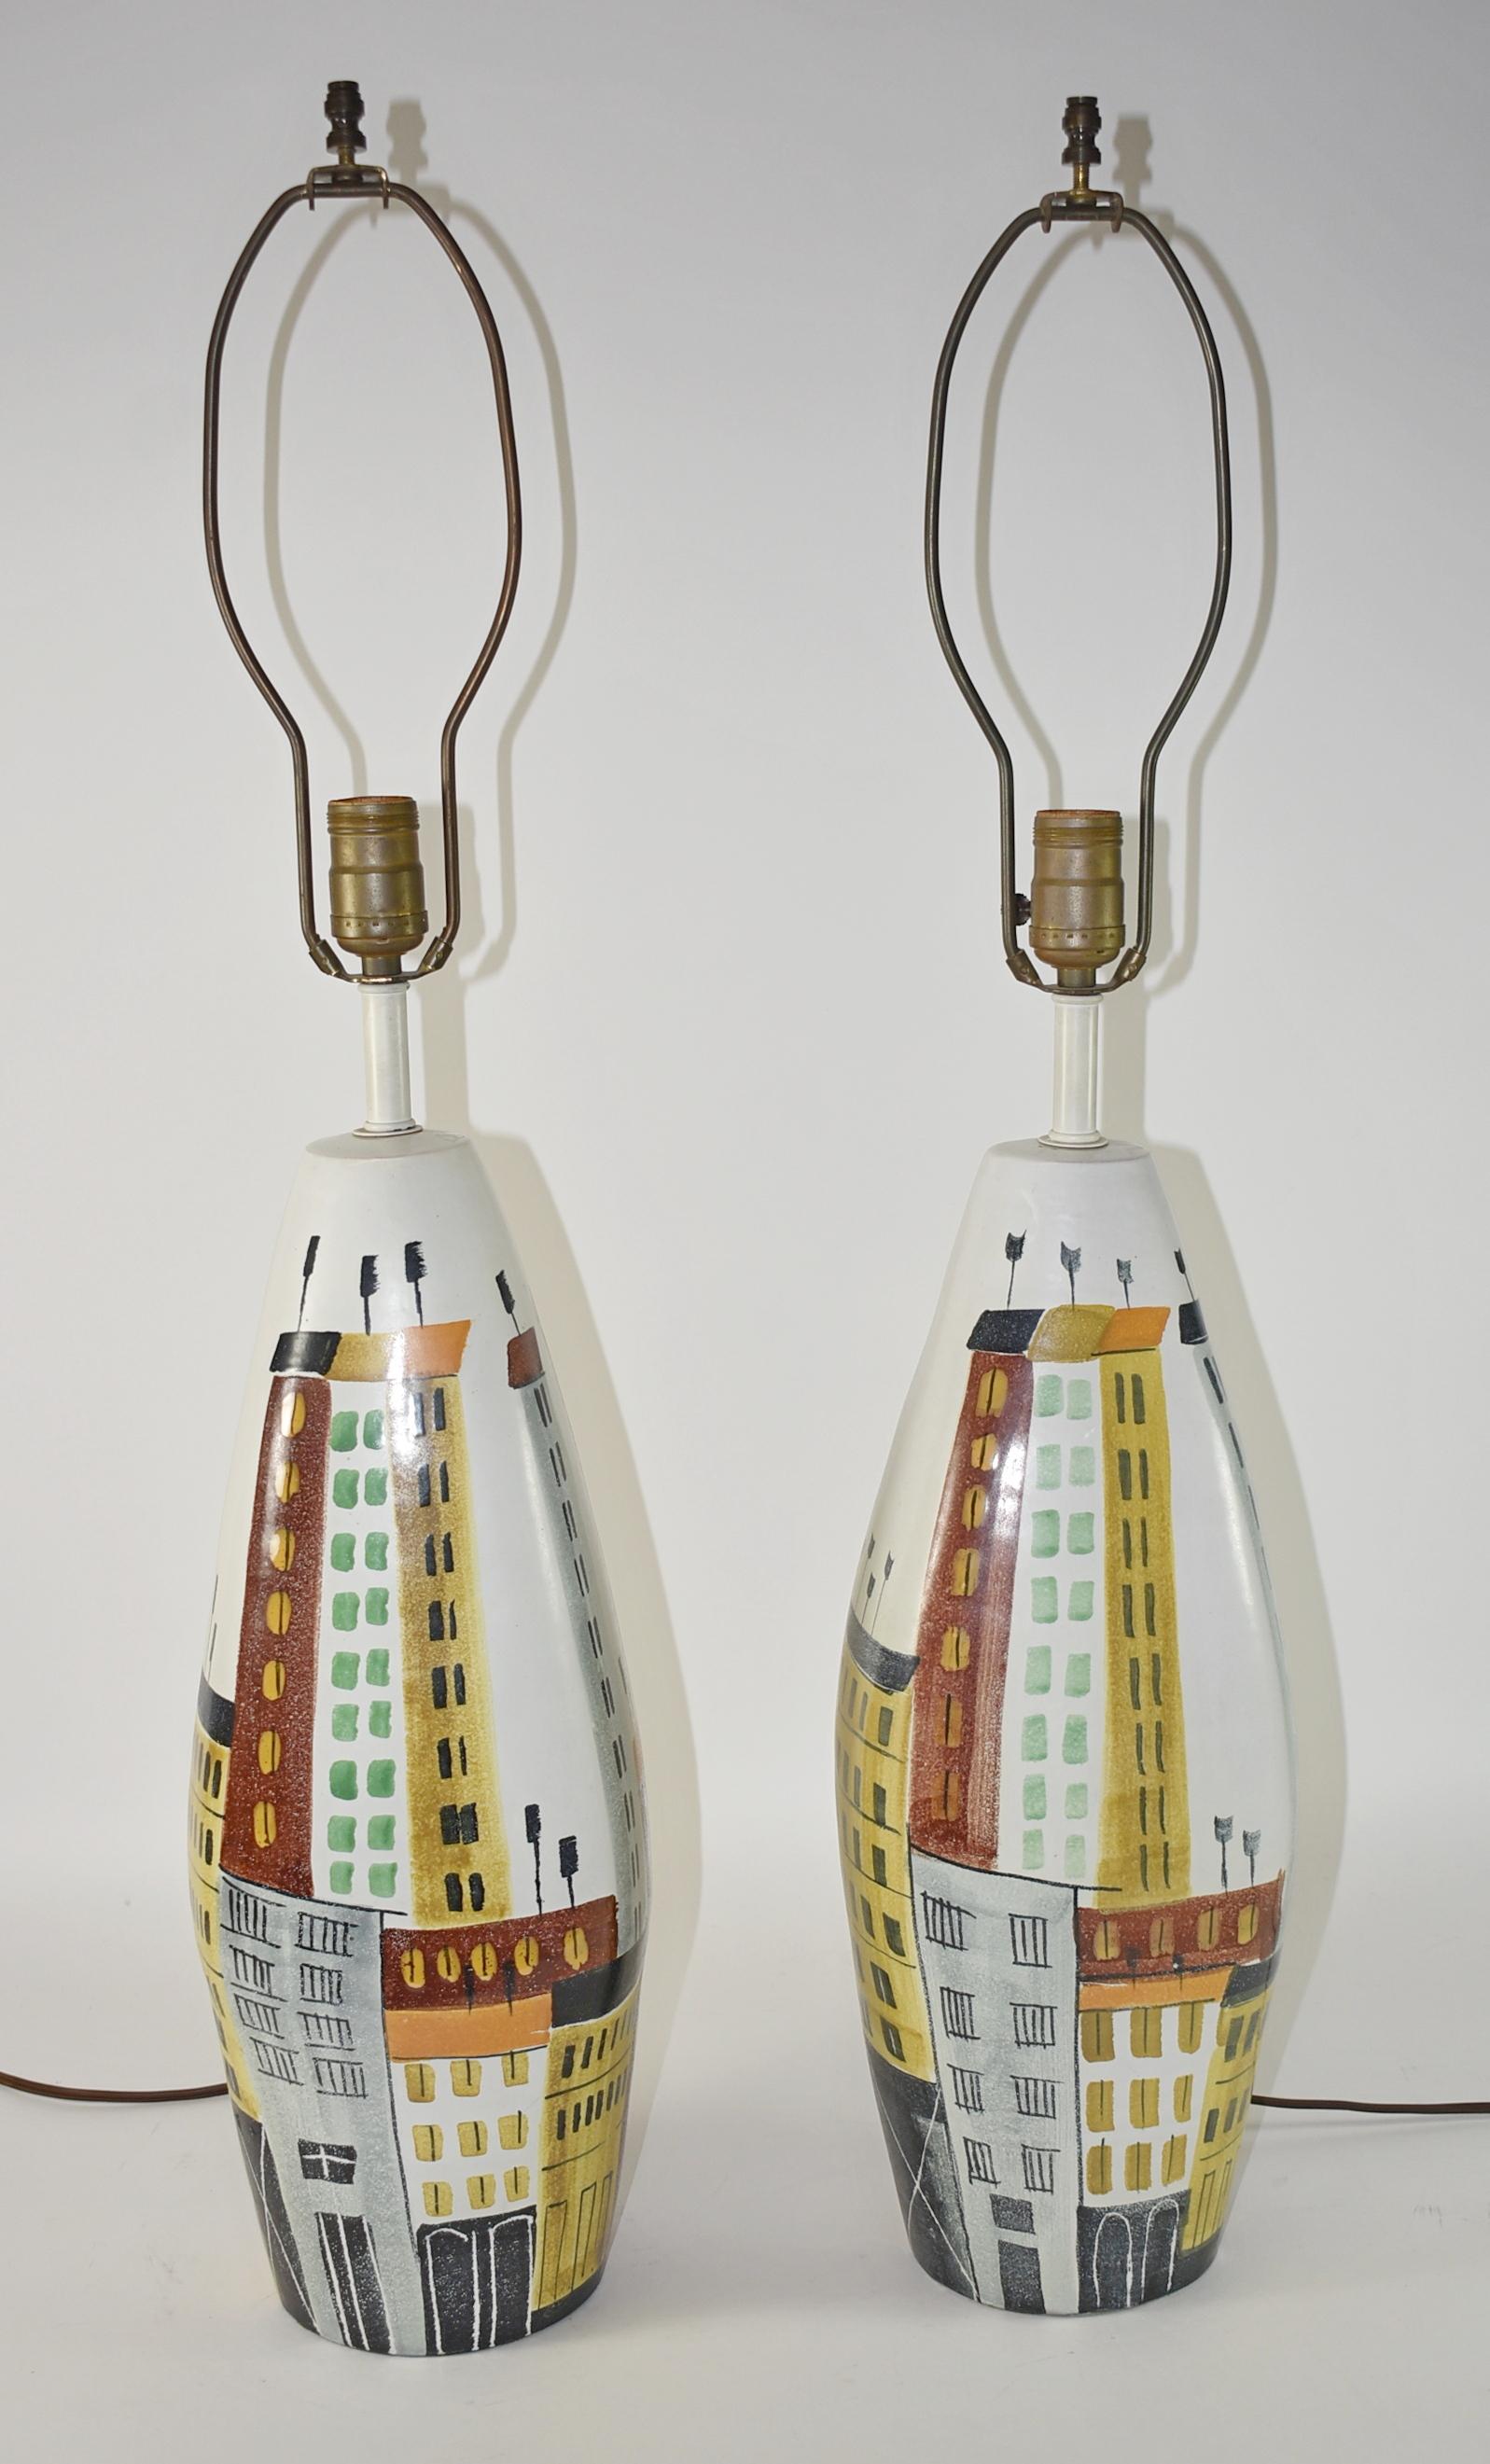 Pair of Bitossi Raymor Italian Cityscape ceramic table lamps. circa 1960s. Mid-Century Modern Style. The company was incorporated by Guido Bitossi in 1921, though the family began making art pottery in the Mid-19th century. Hand decorated city scene